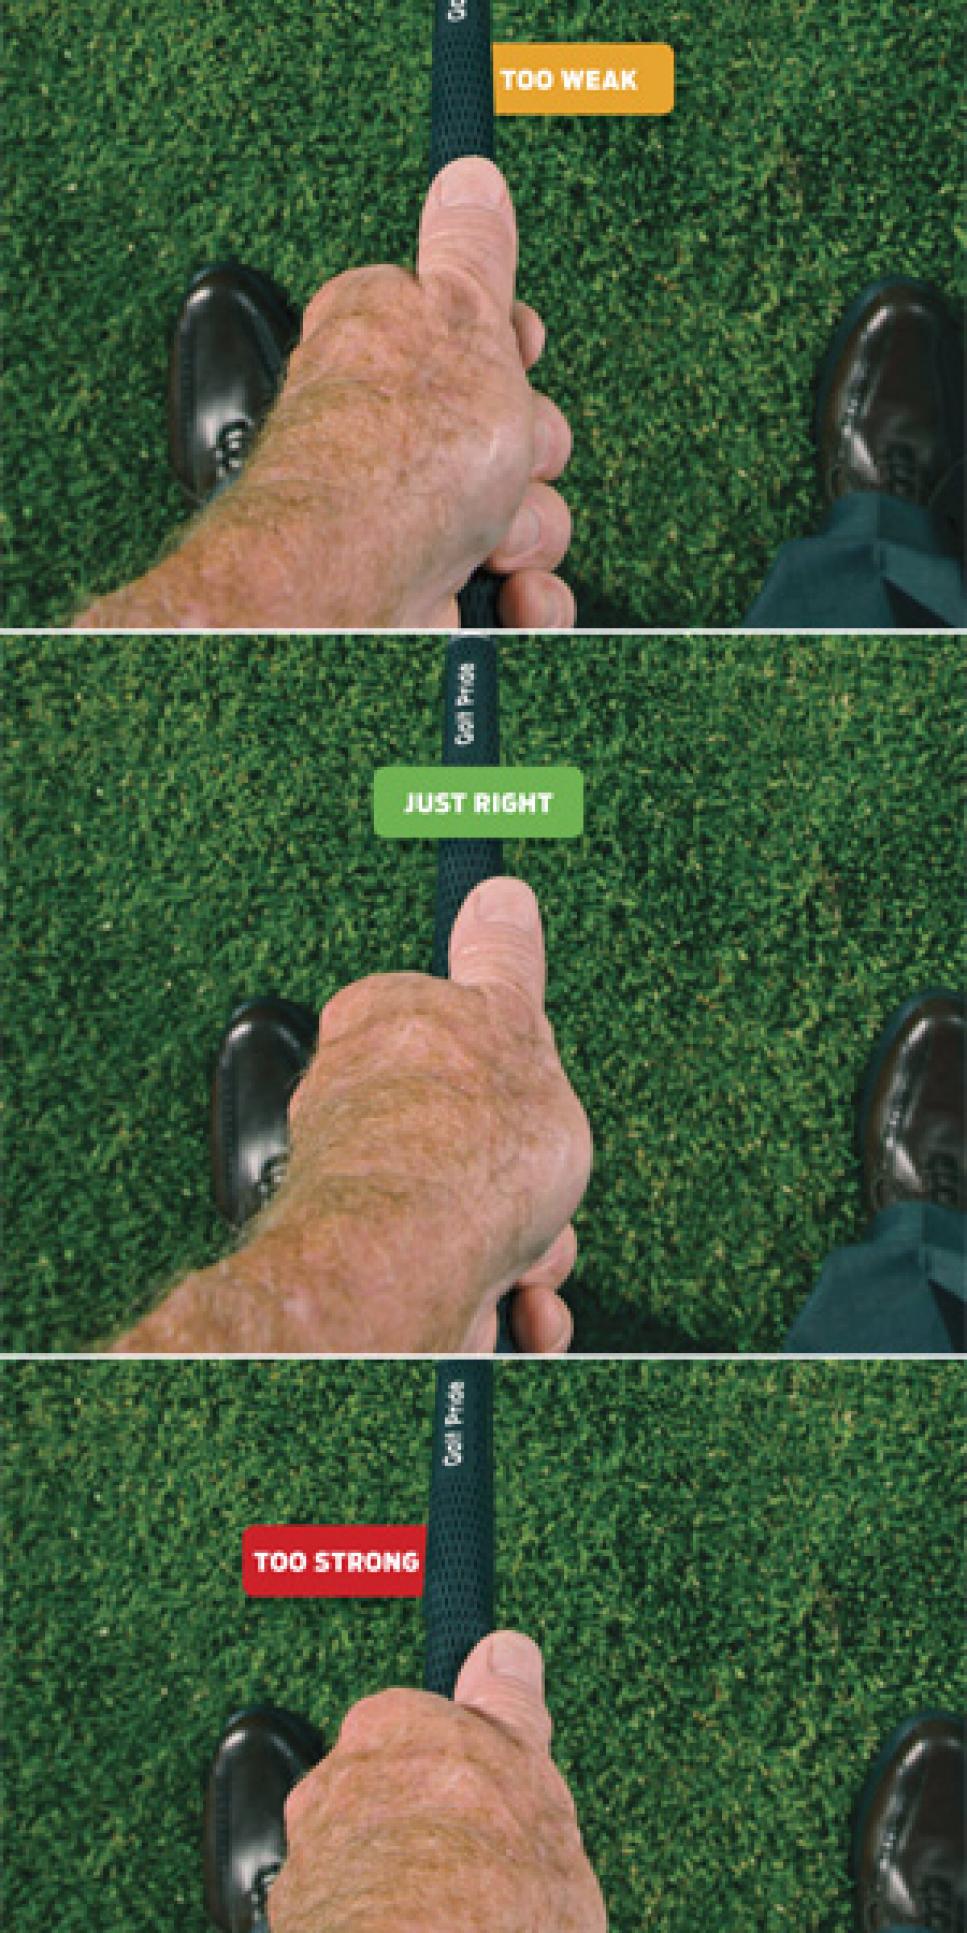 Tom Watson: Always Check Your Grip | How To | Golf Digest